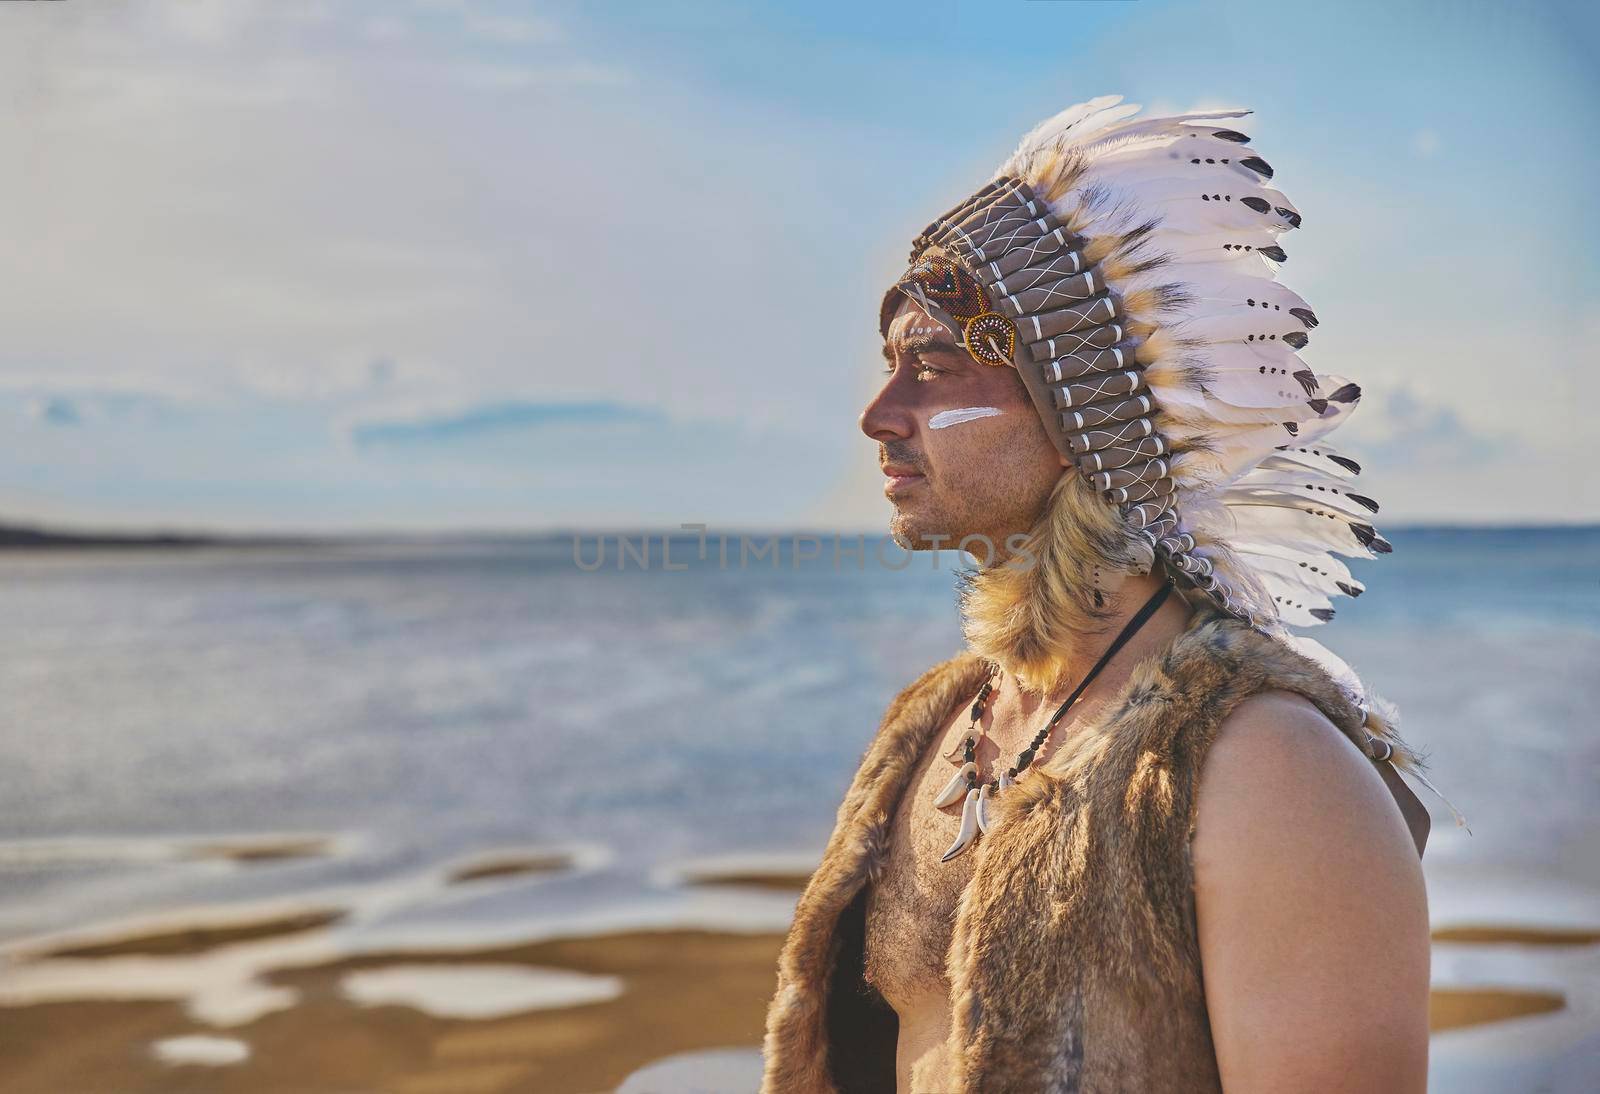 man in traditional Native American clothing near the sea.